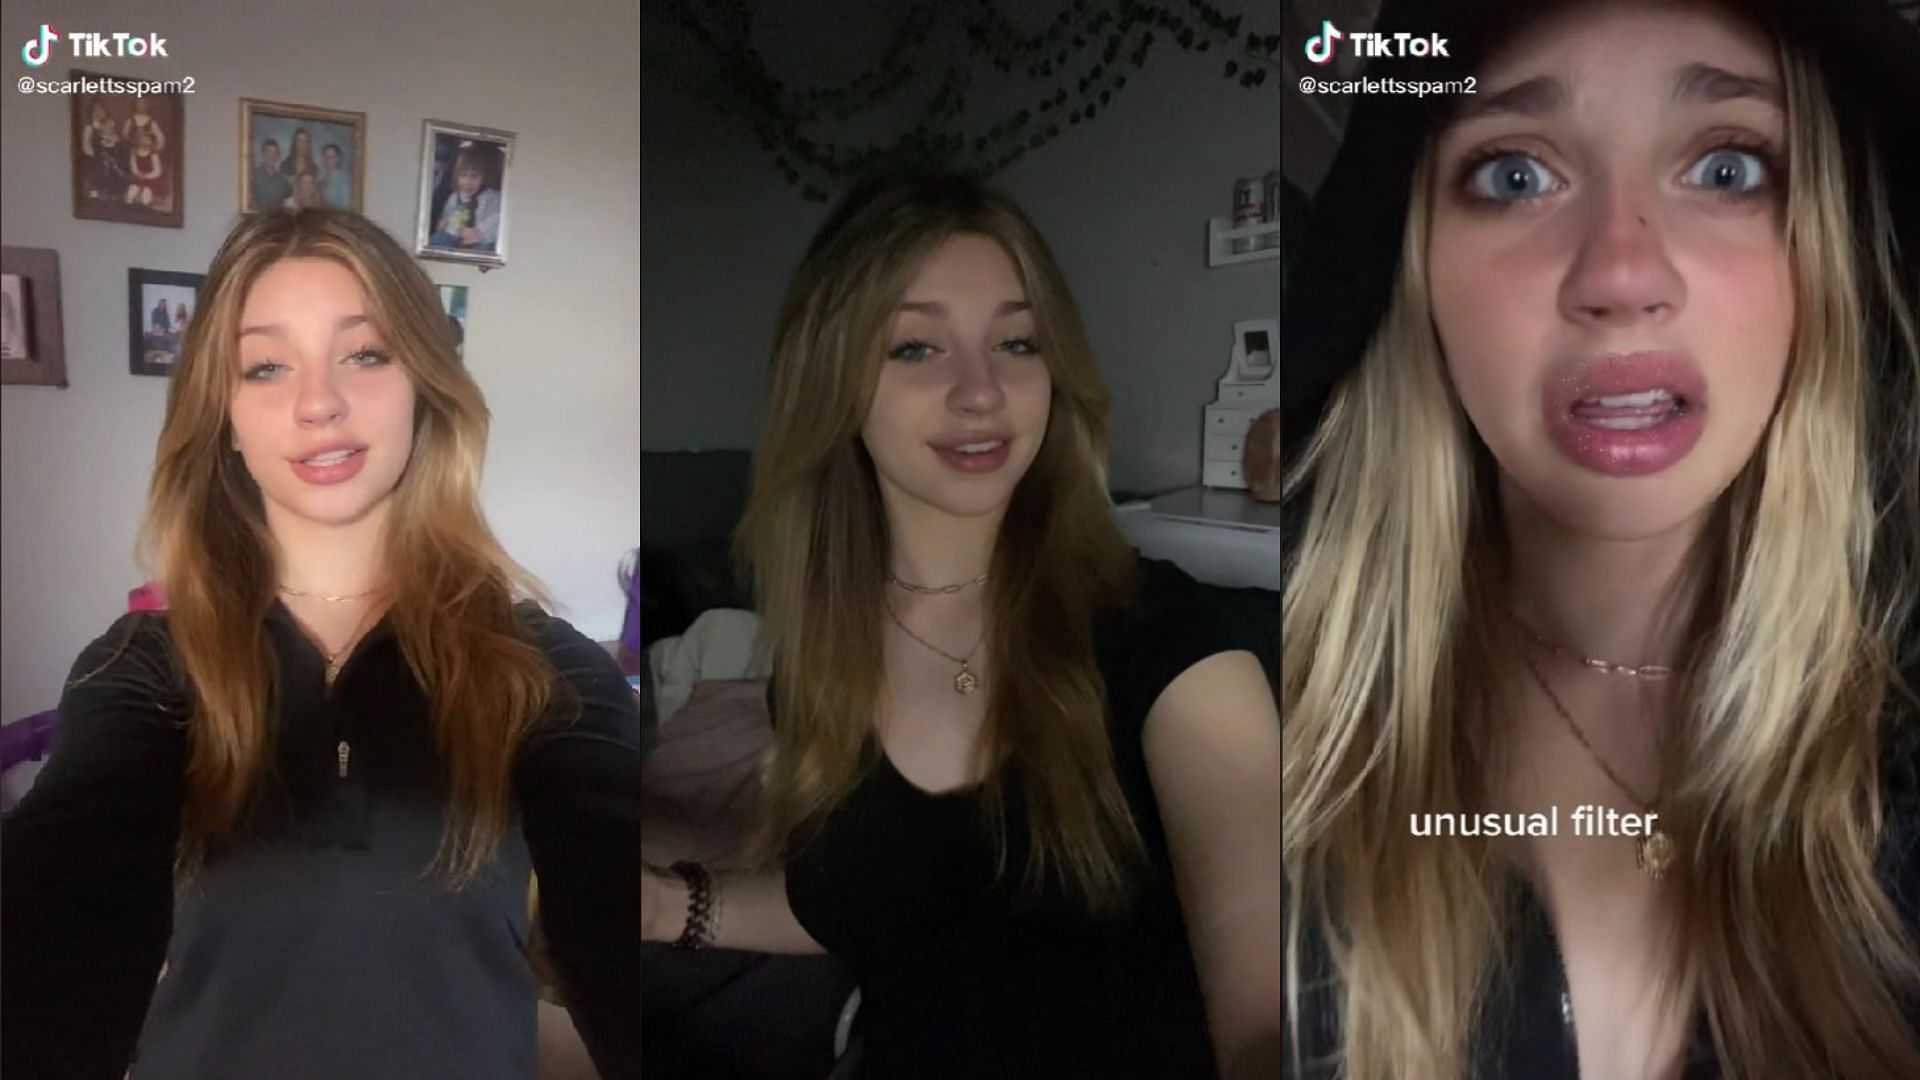 Spam is actually only 13-years-old, contrary to popular belief (Images via scarlettsspam2/TikTok)